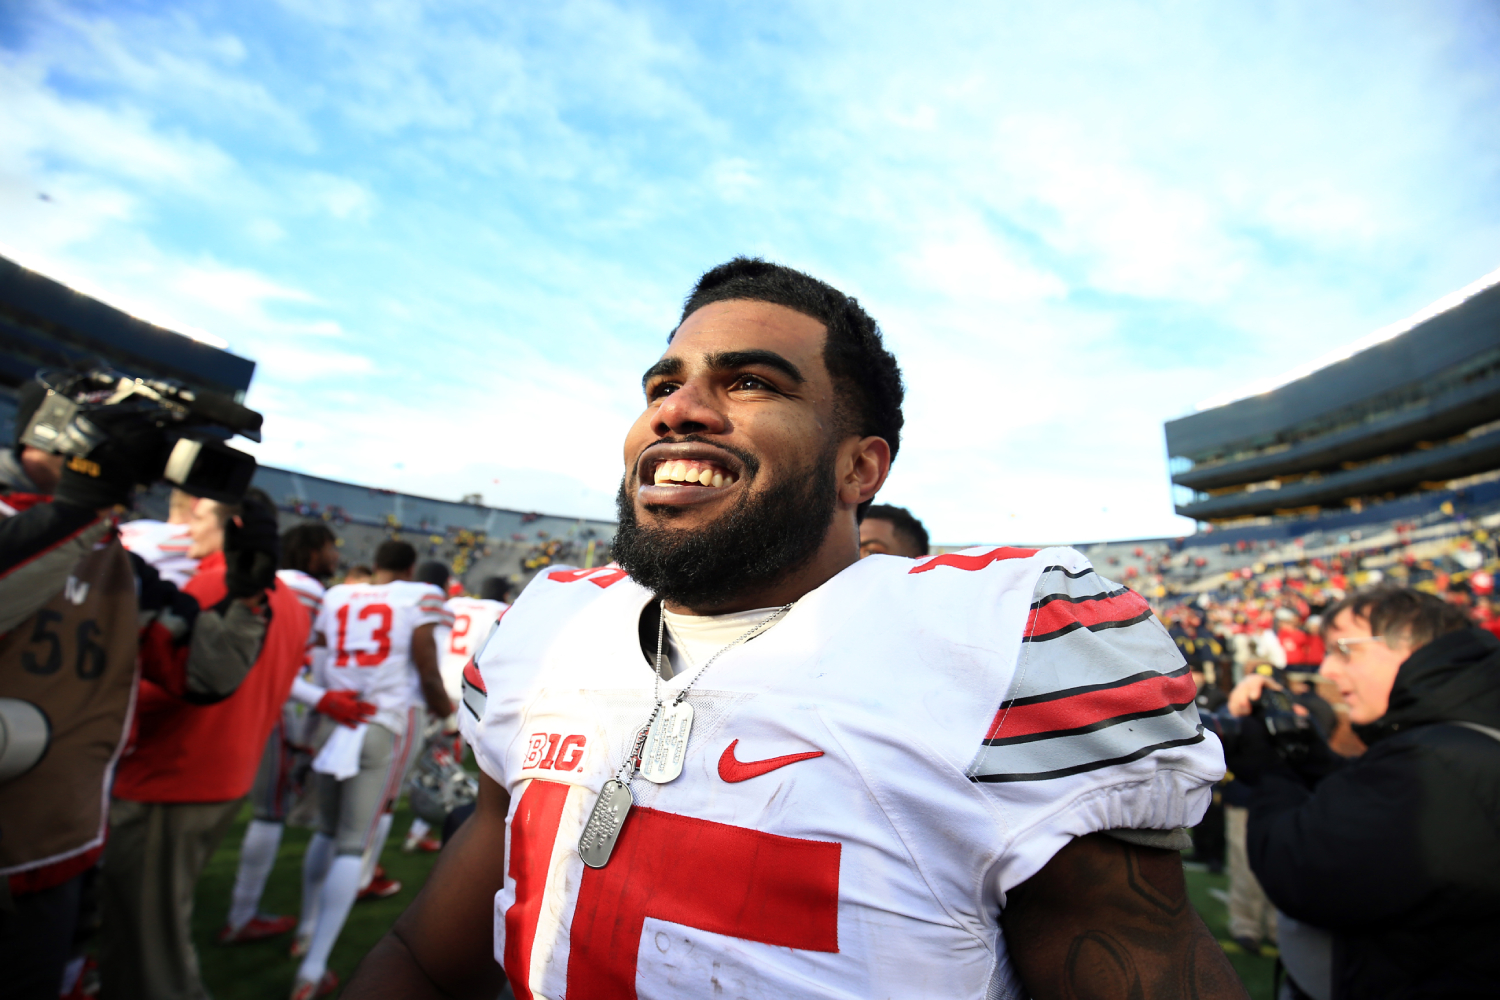 Ezekiel Elliott had a lot of success at Ohio State and has been great for the Dallas Cowboys. Is he on Ohio State's Mount Rushmore?